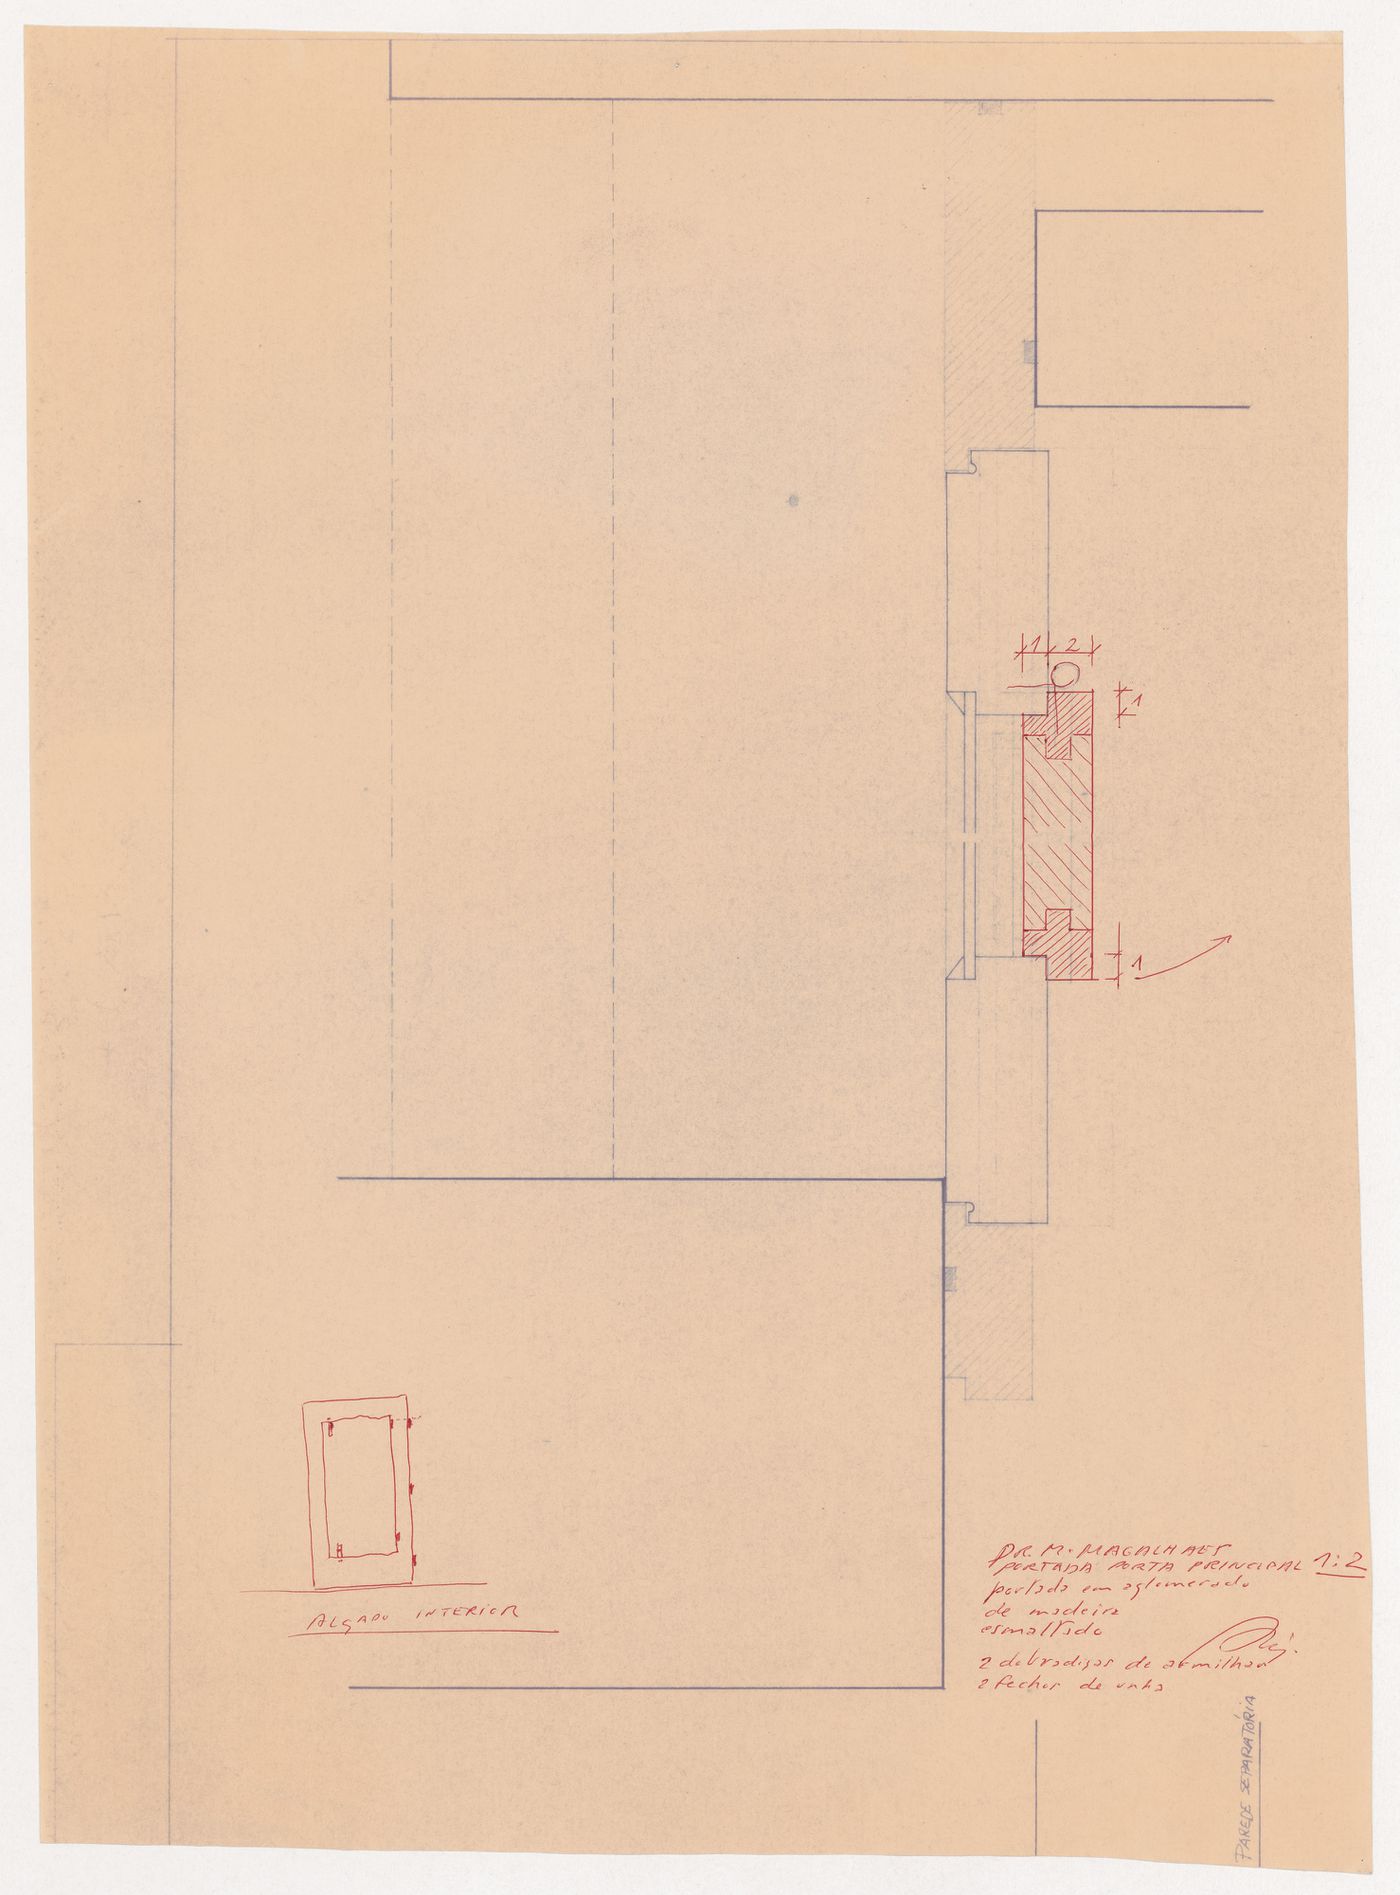 Plan and elevation for main entrance to Casa Manuel Magalhães, Porto